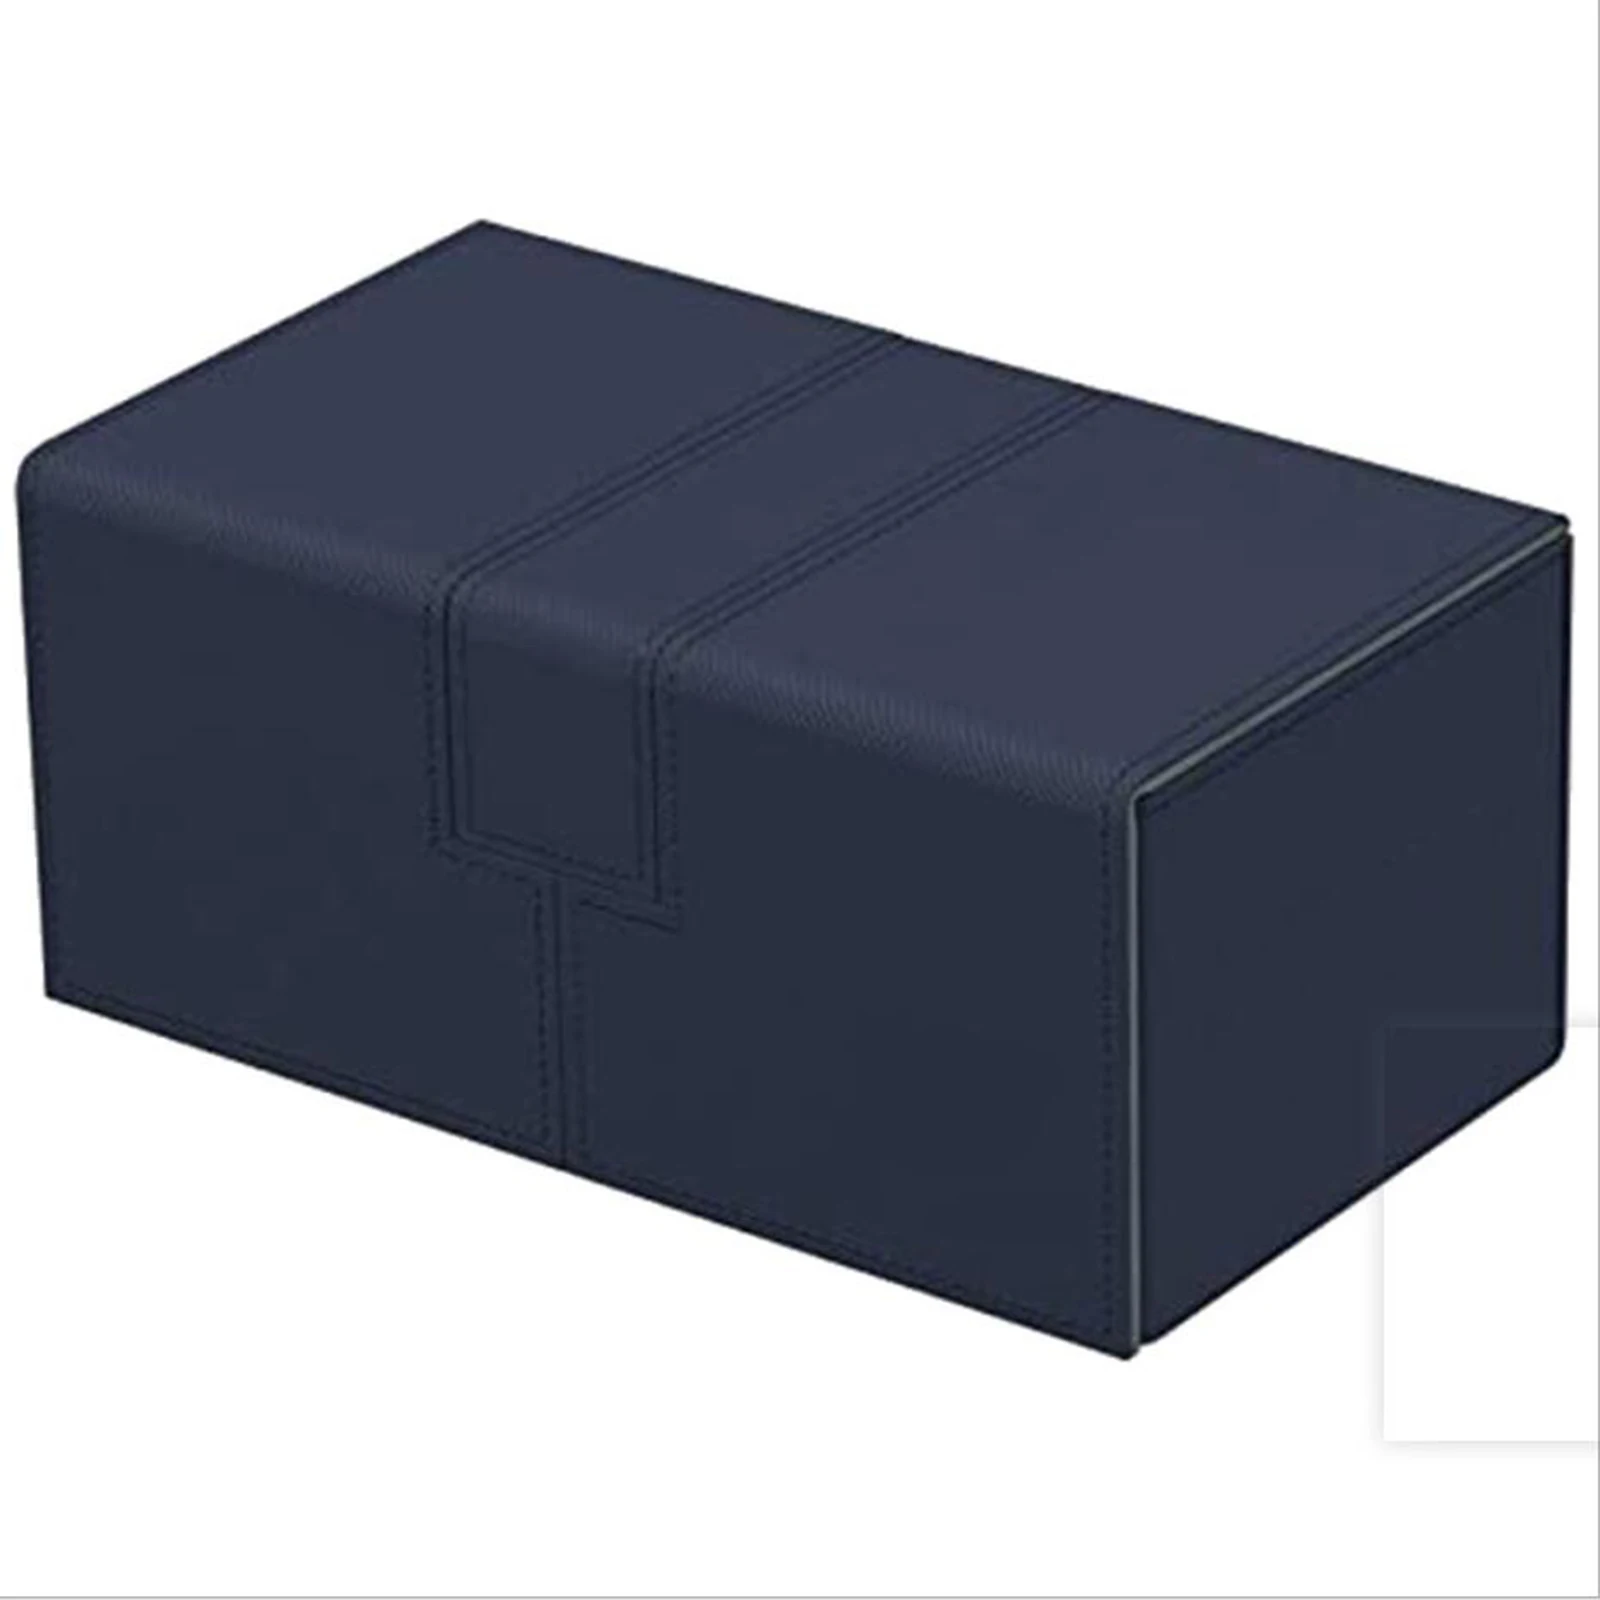 PU Leather Collection Trading Gaming Card Boxes 3 Slot Organizer Dice Holder for Baseball Game Cards Sport Cards